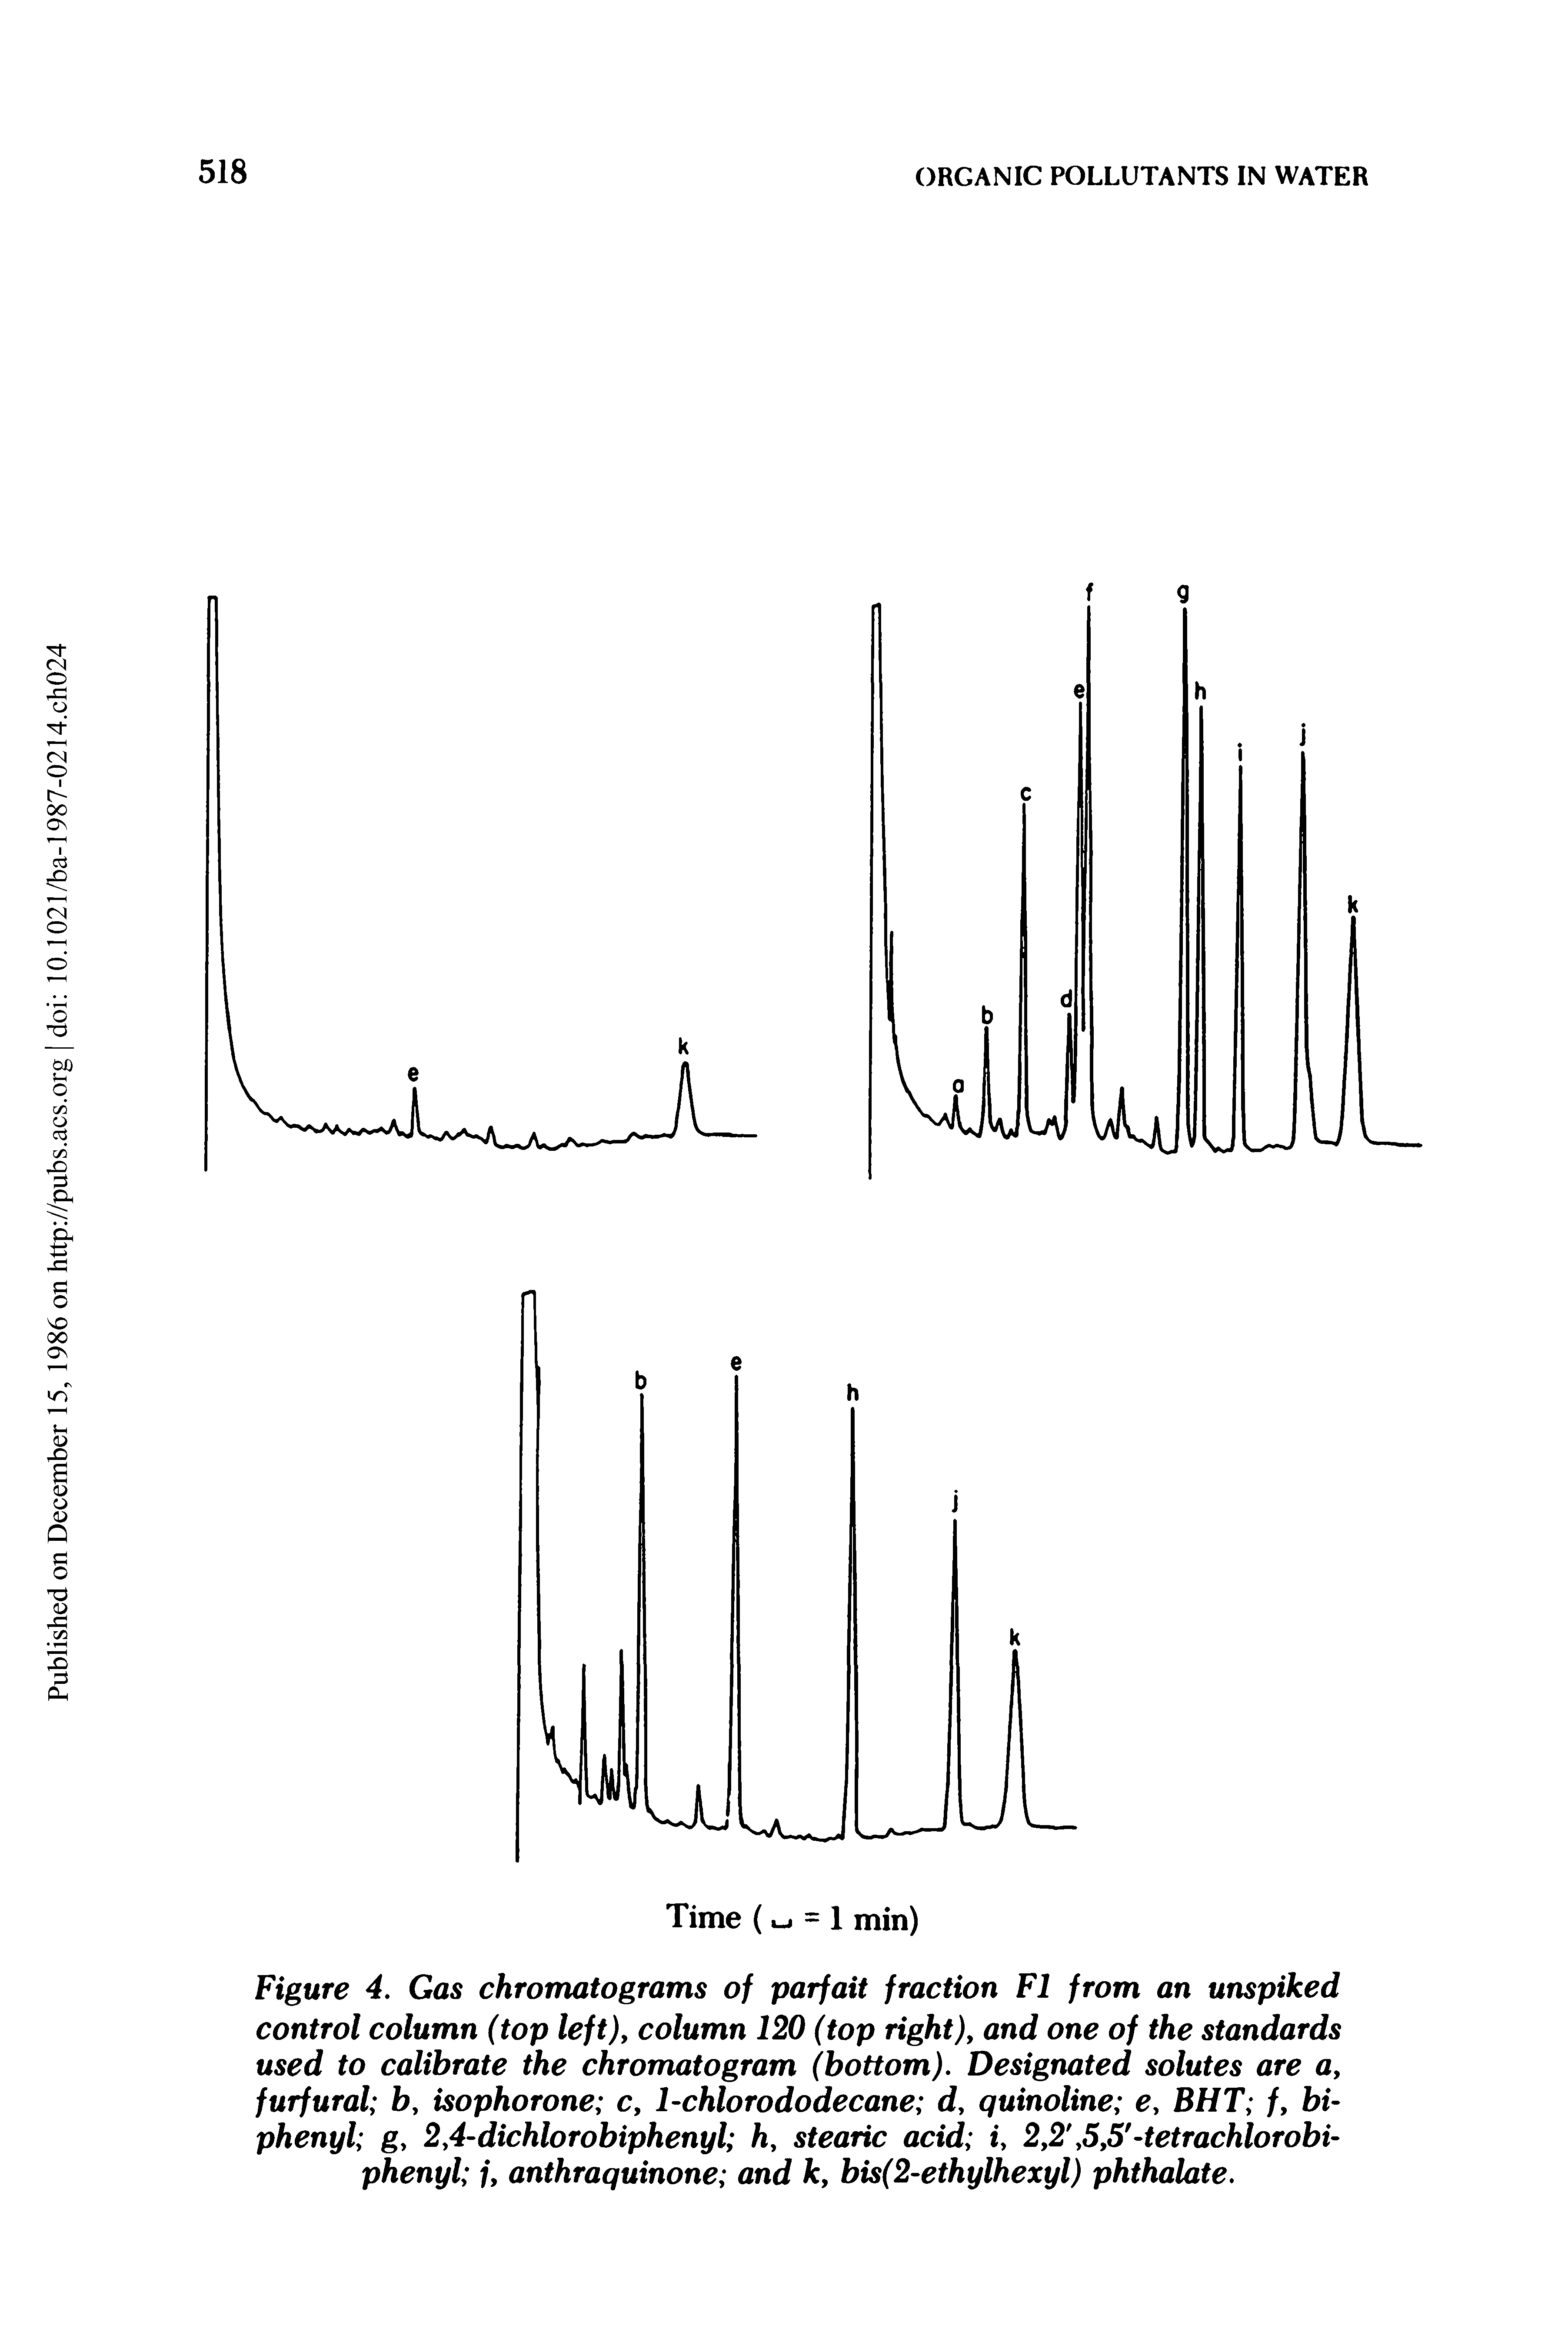 Figure 4. Gas chromatograms of parfait fraction FI from an unspiked control column (top left)y column 120 (top right), and one of the standards used to calibrate the chromatogram (bottom). Designated solutes are a, furfural by isophorone cy 1-chlorododecane dy quinoline ey BHT fy biphenyl gy 2y4-dichlorobiphenyl h, stearic acid i, 2y2, 5y5 -tetrachlorobi-phenyl /, anthraquinone and ky bis(2-ethylhexyl) phthalate.